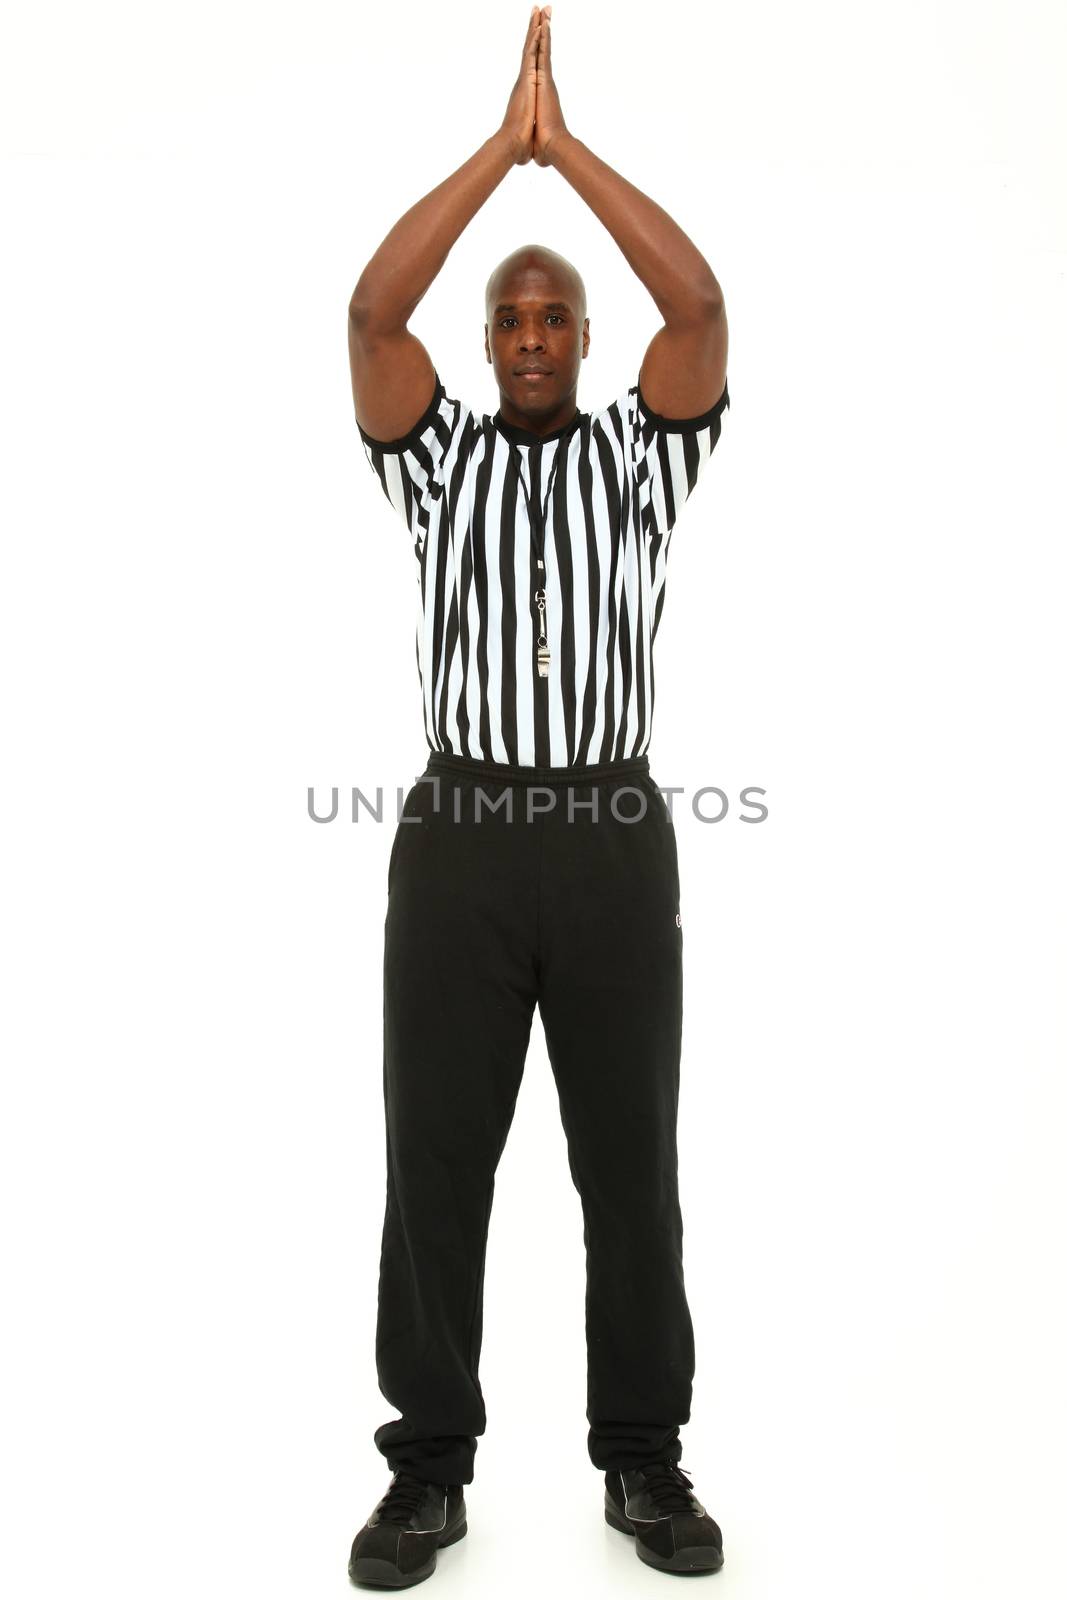 Attractive fit black man in referee uniform over white. by duplass